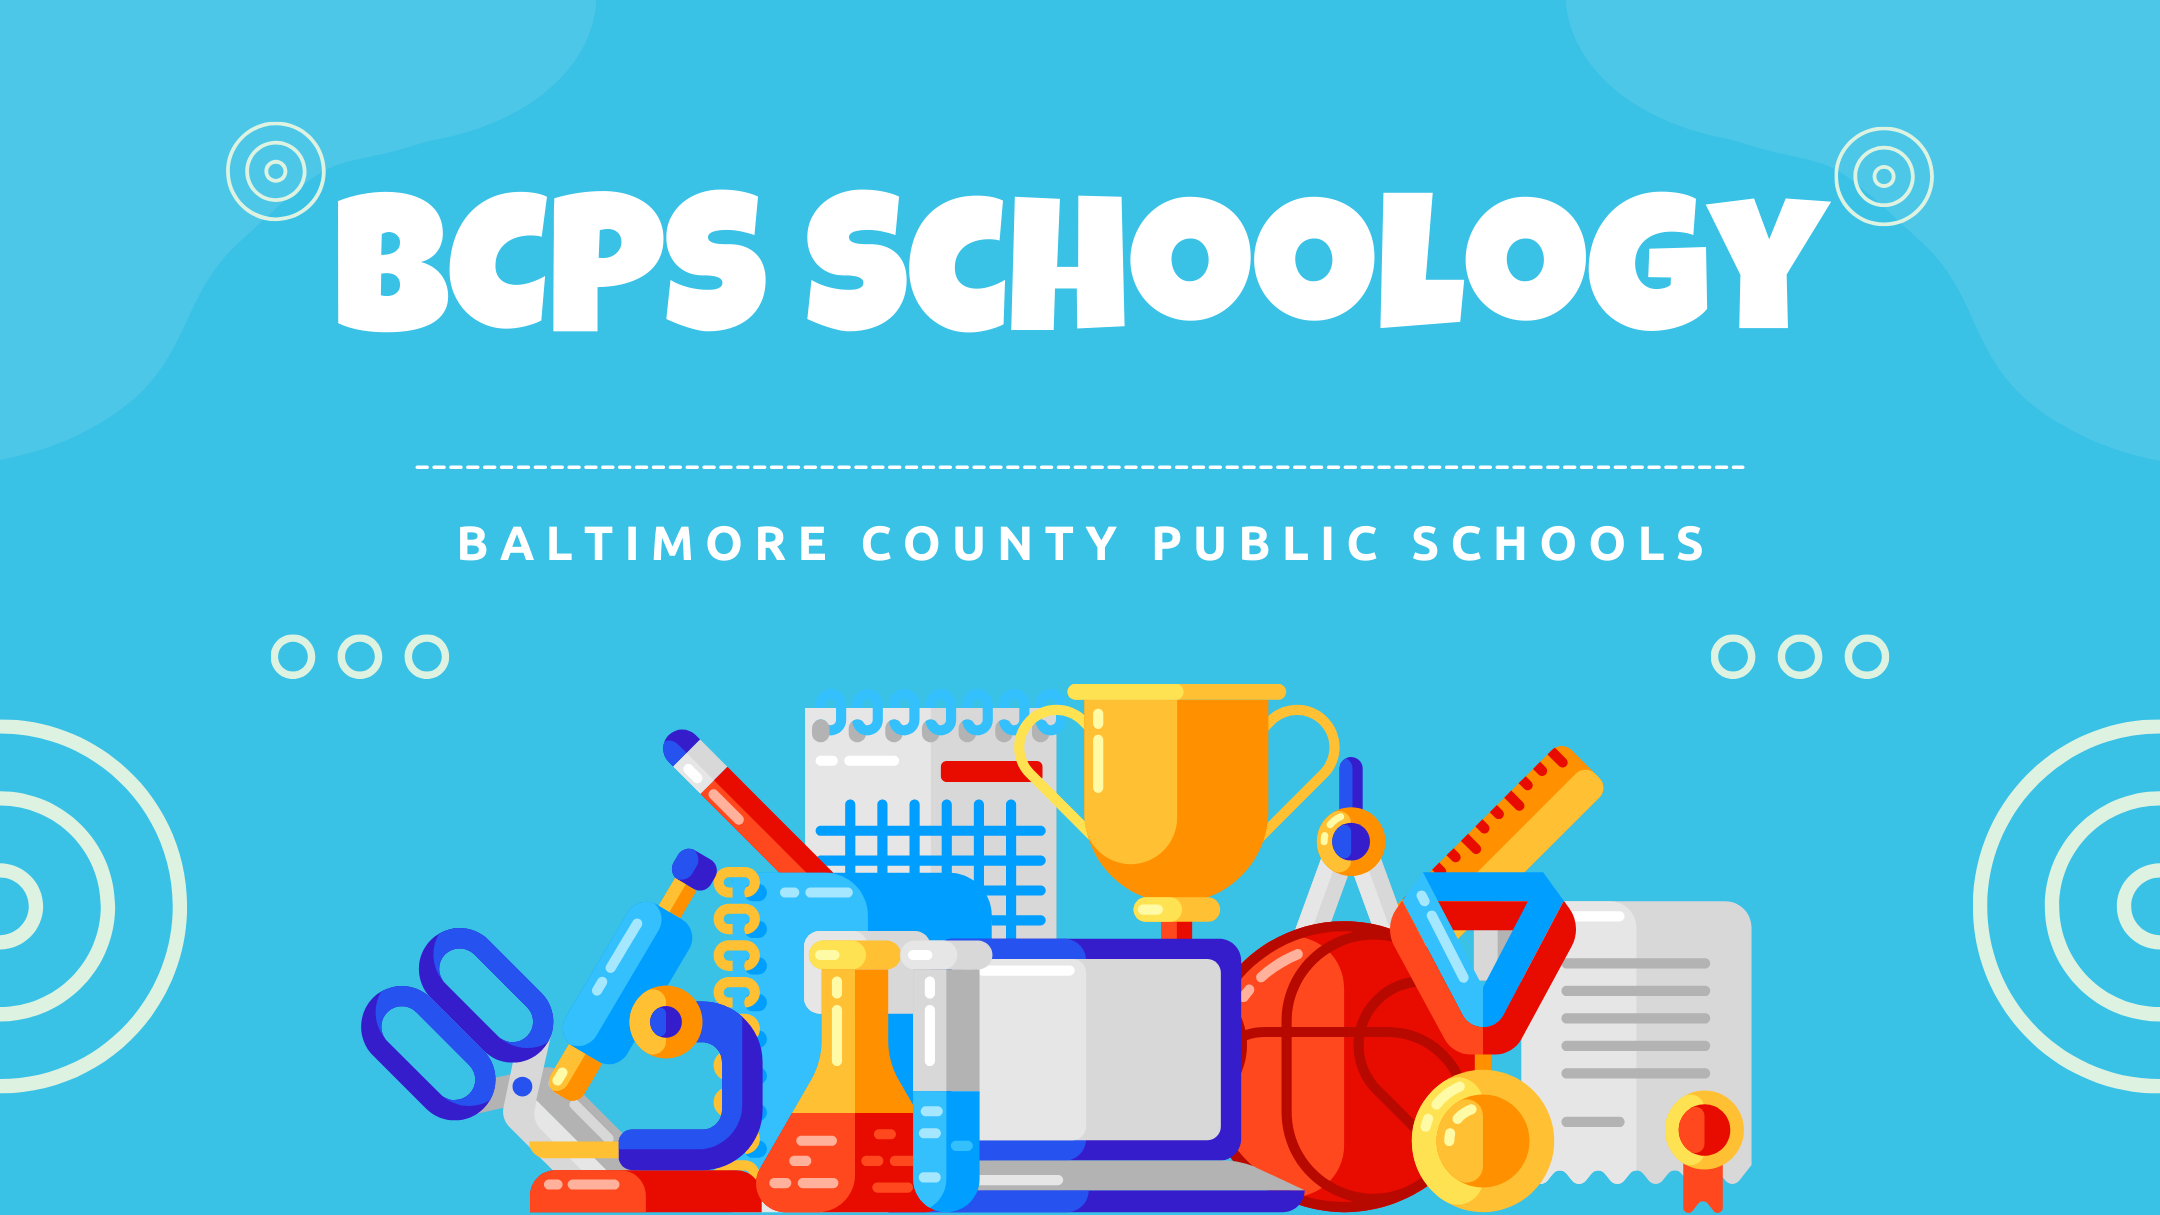 BCPS Schoology: Baltimore County Public Schools And Integration